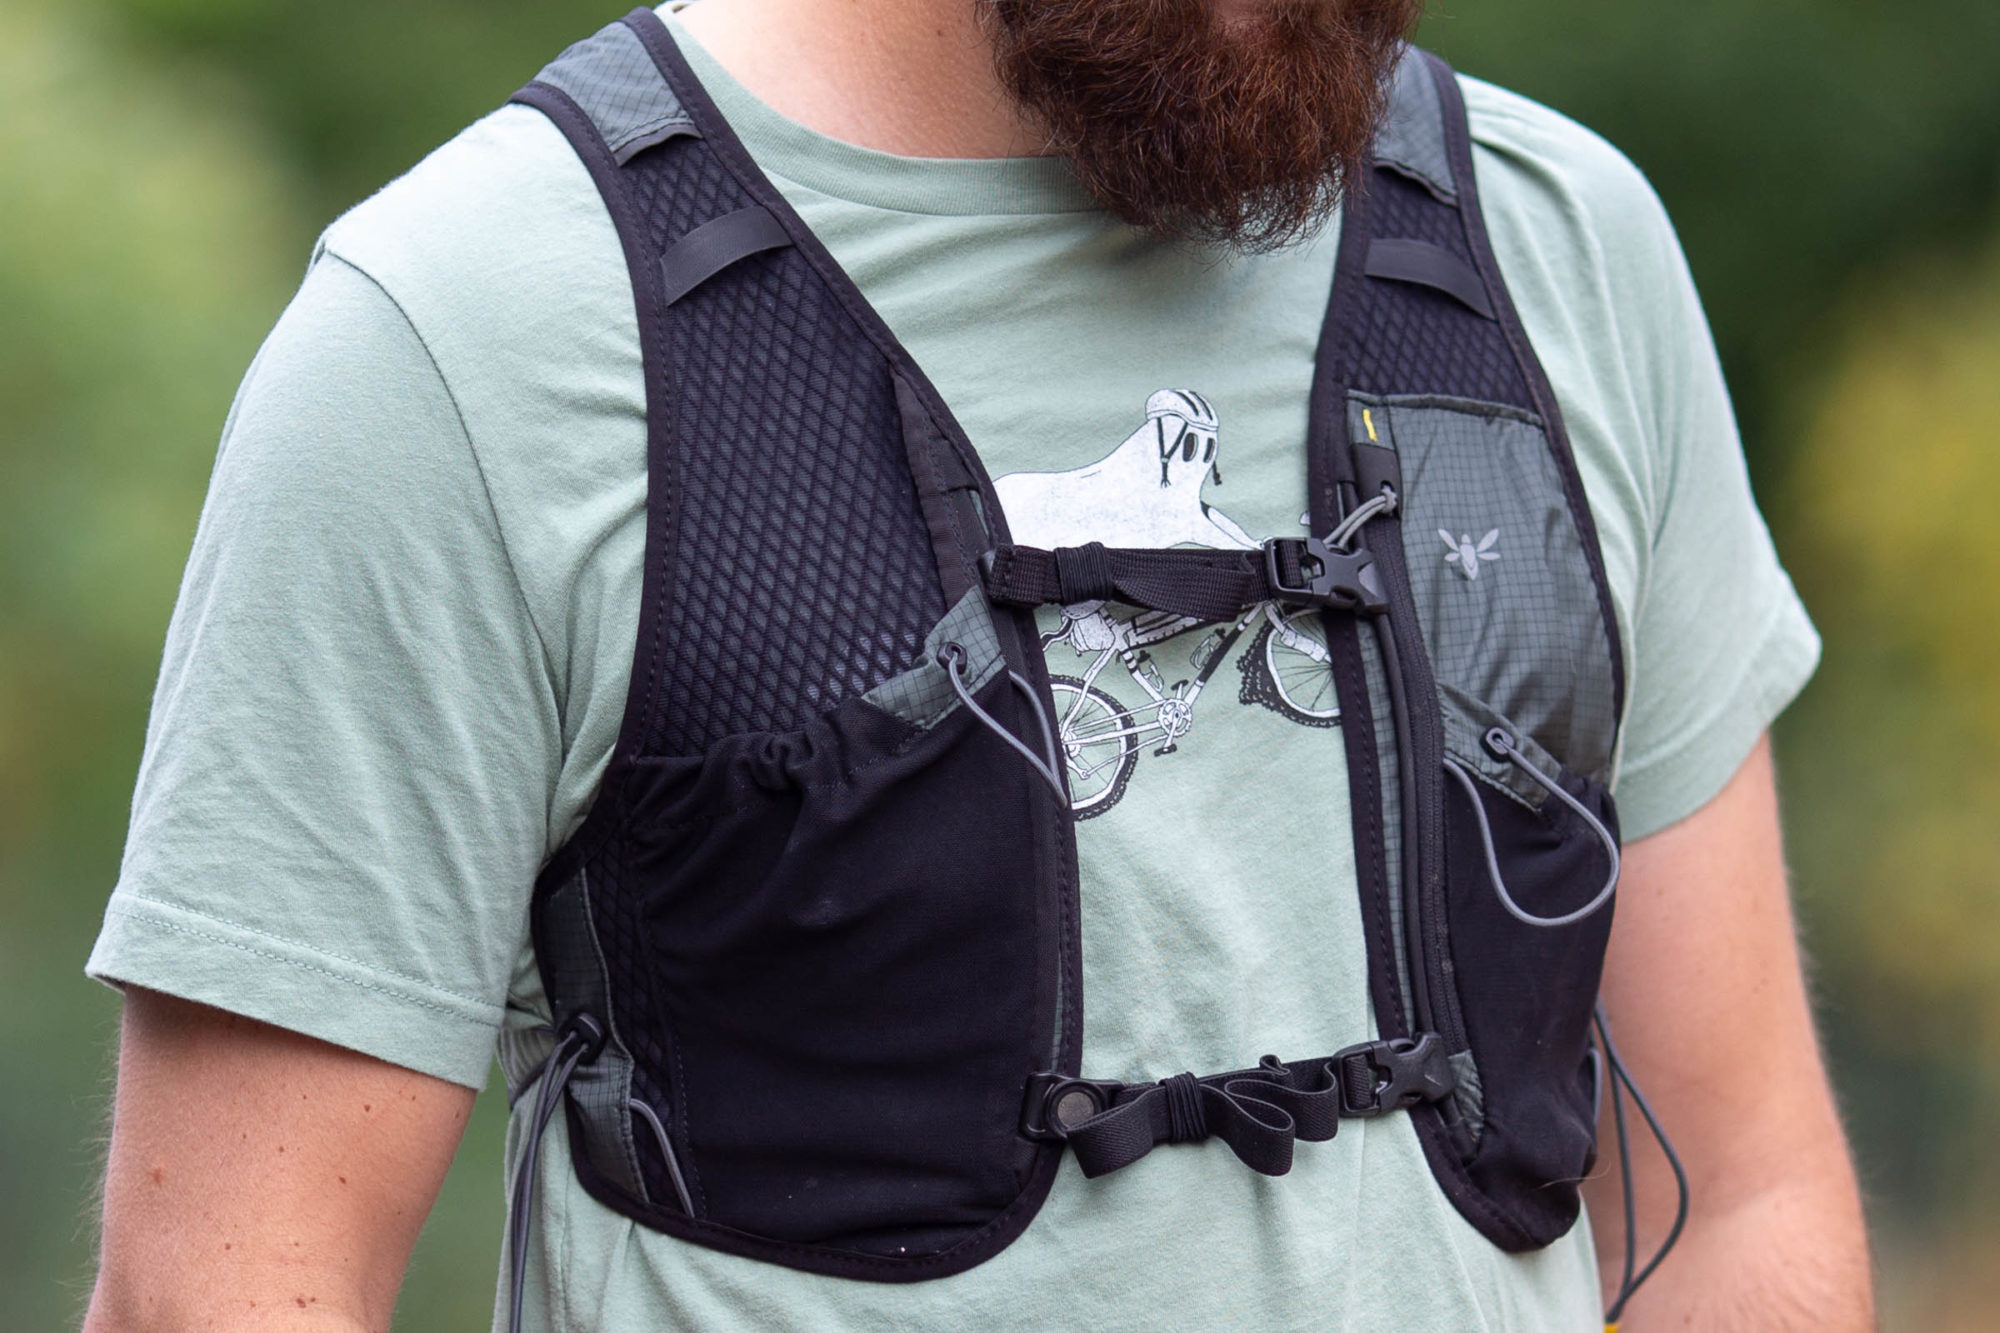 Two Hydration Vests Reviewed: Apidura vs PEdALED - BIKEPACKING.com